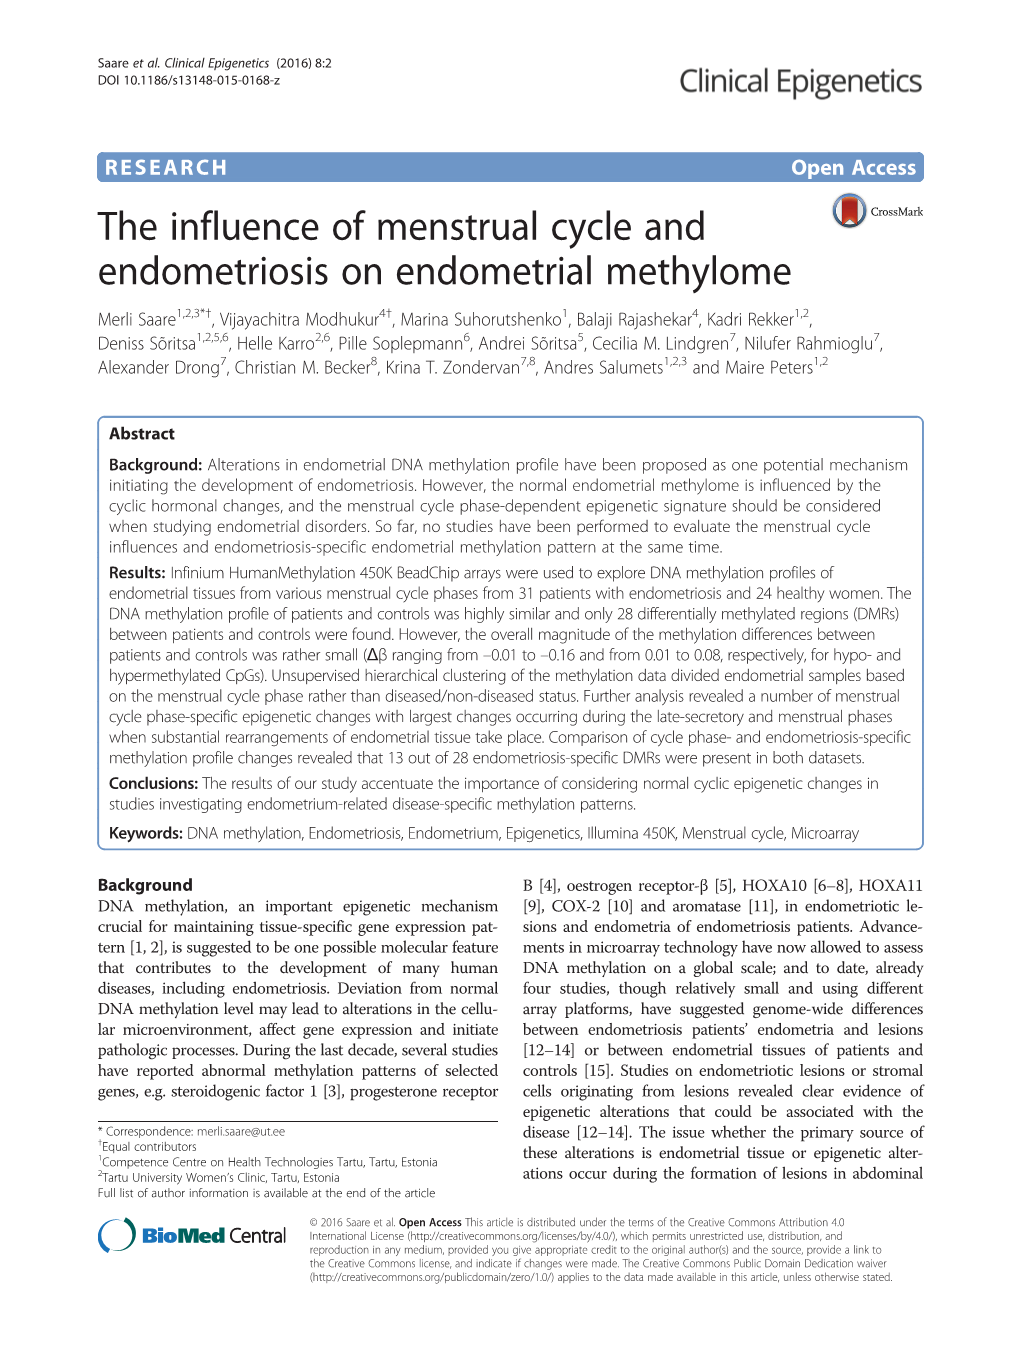 The Influence of Menstrual Cycle and Endometriosis on Endometrial